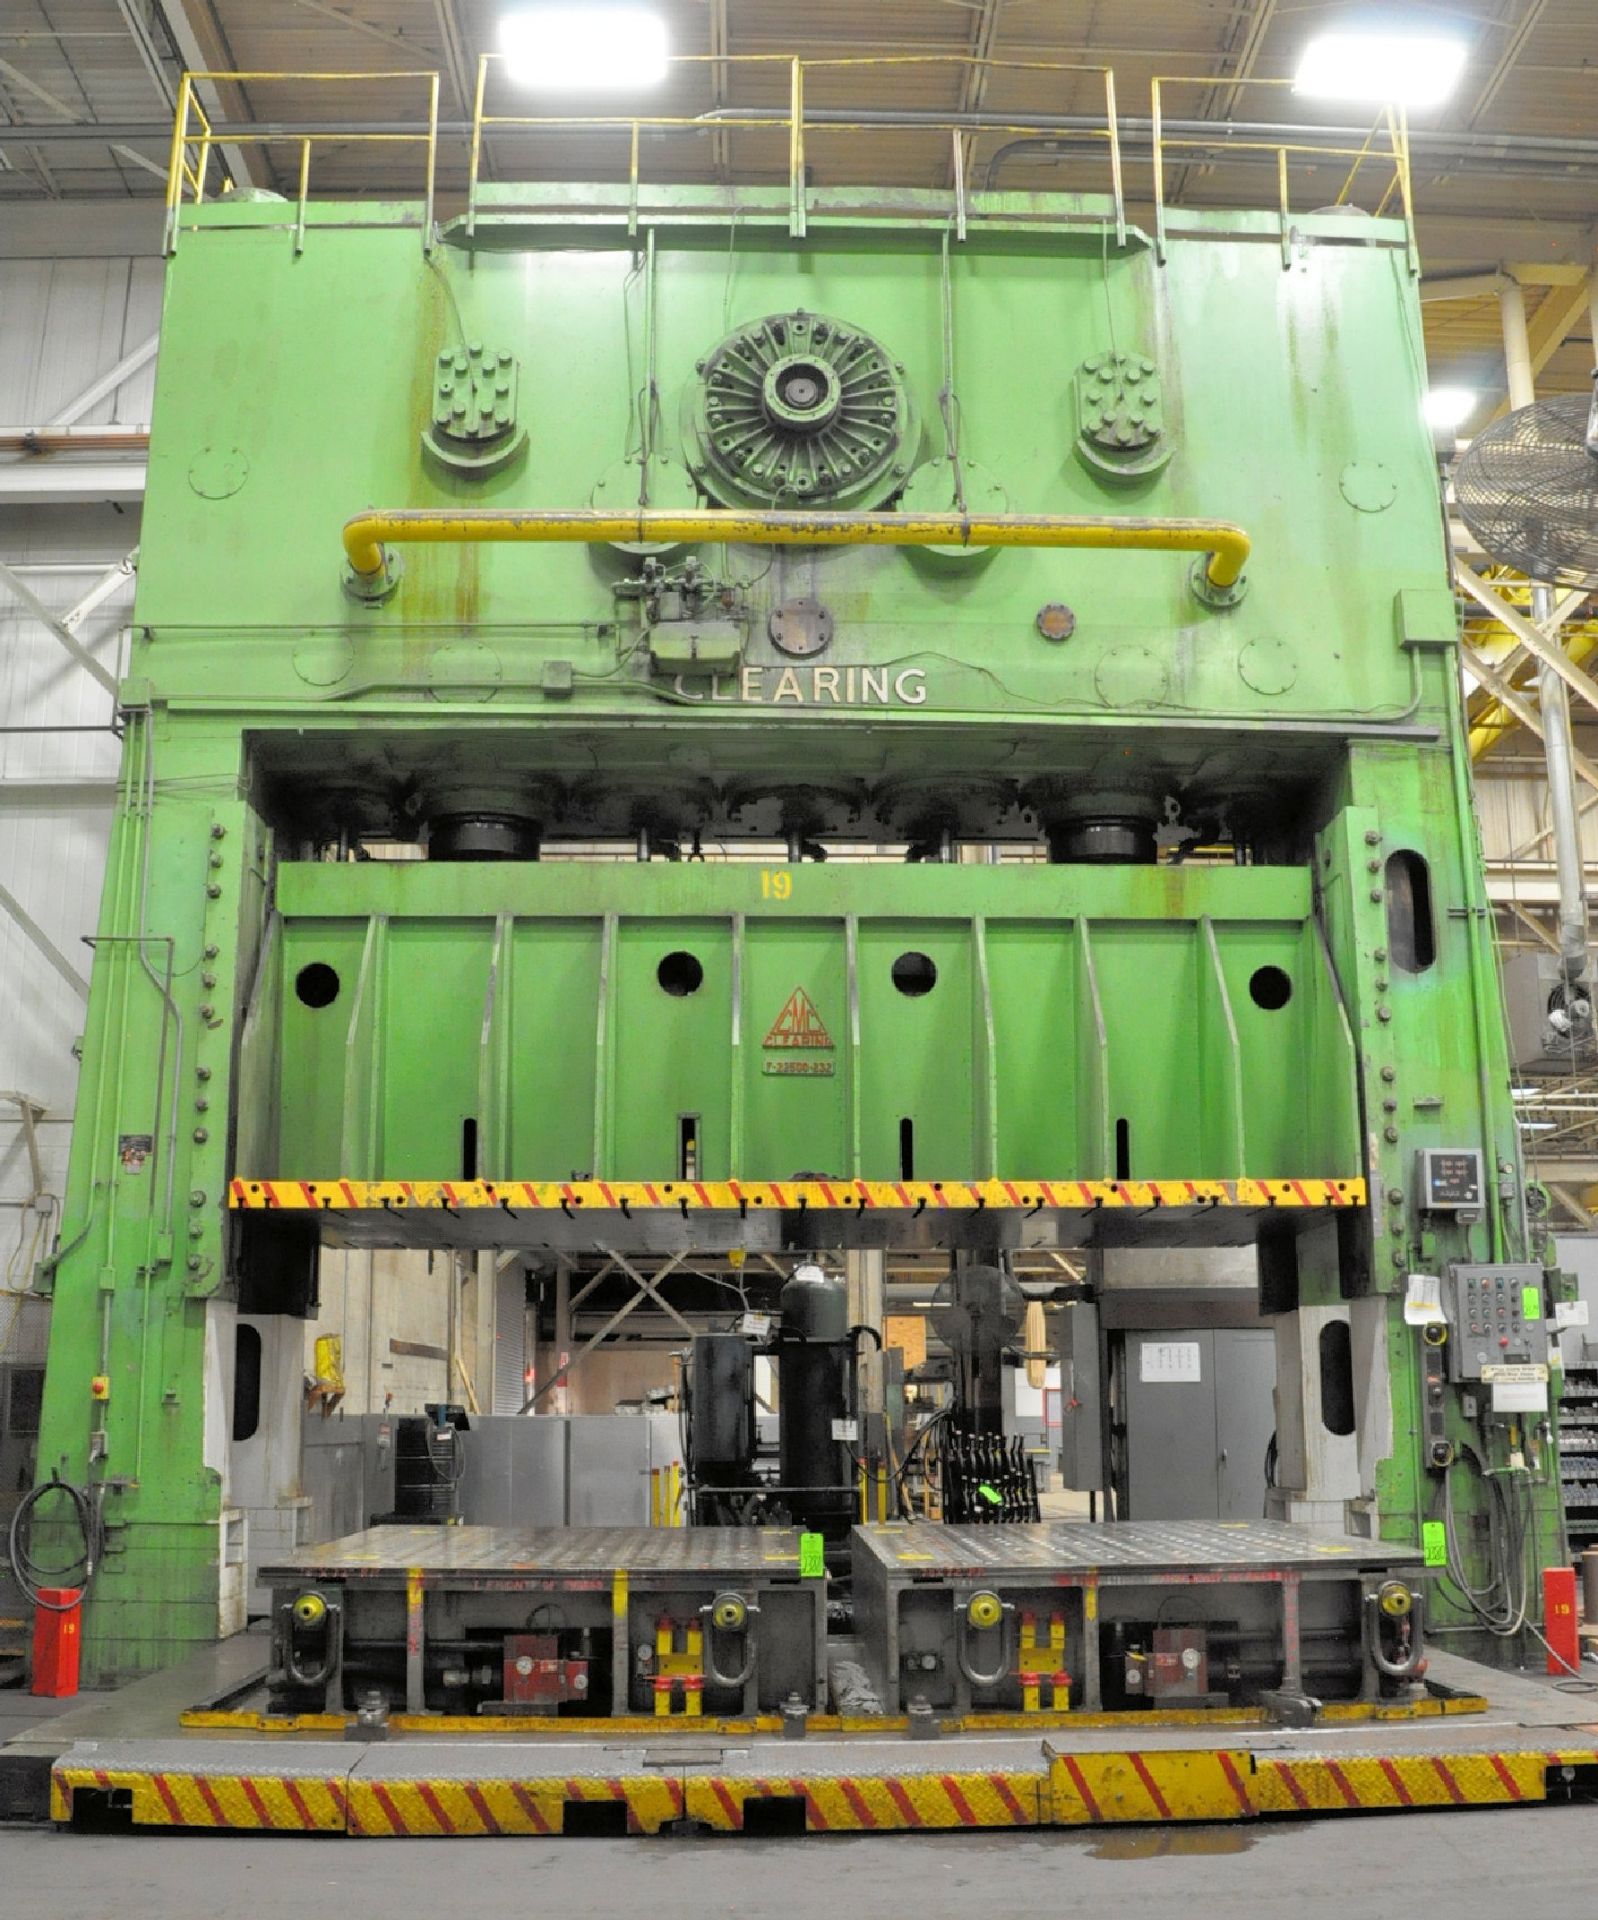 Clearing Model F22500-232, 2,500-Ton 2-Point Mechanical Straight Side Press, 234" x 120" x 6" Rollin